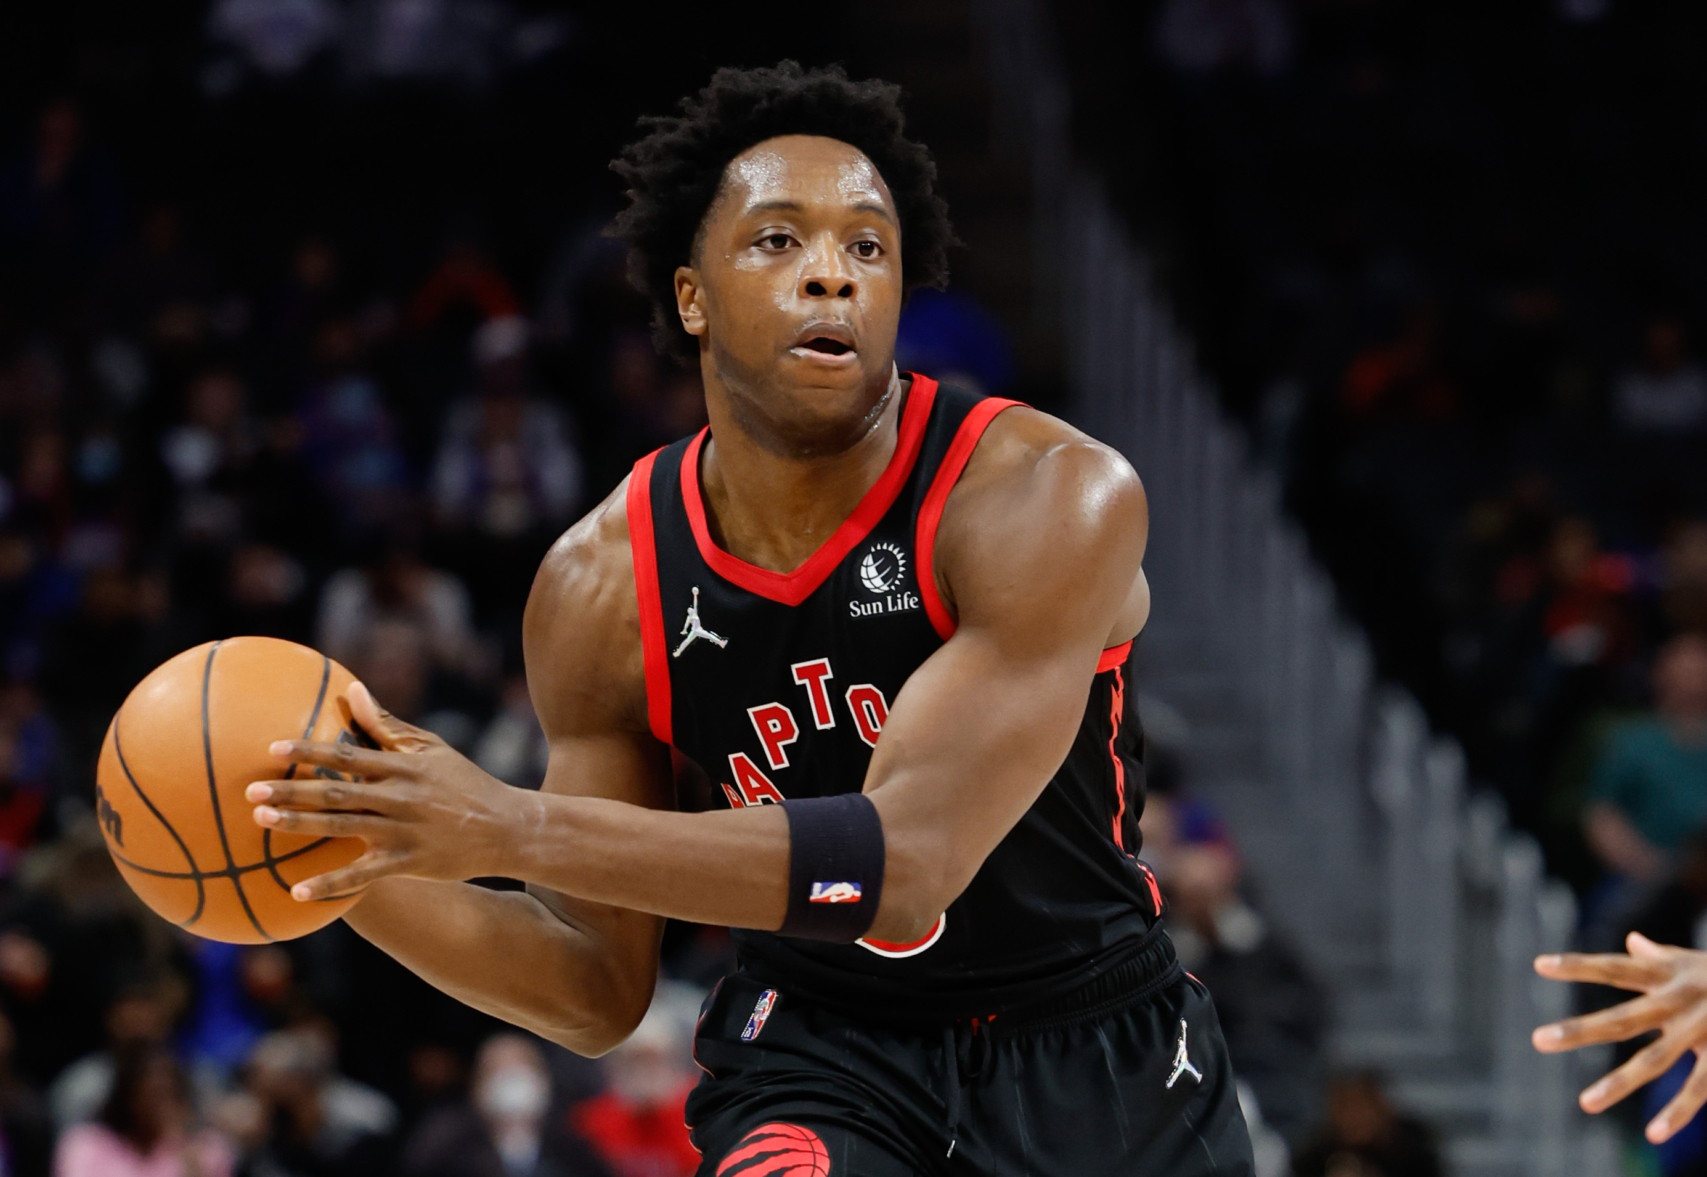 New York Knicks and Phoenix Suns reportedly in trade hunt for Raptors star